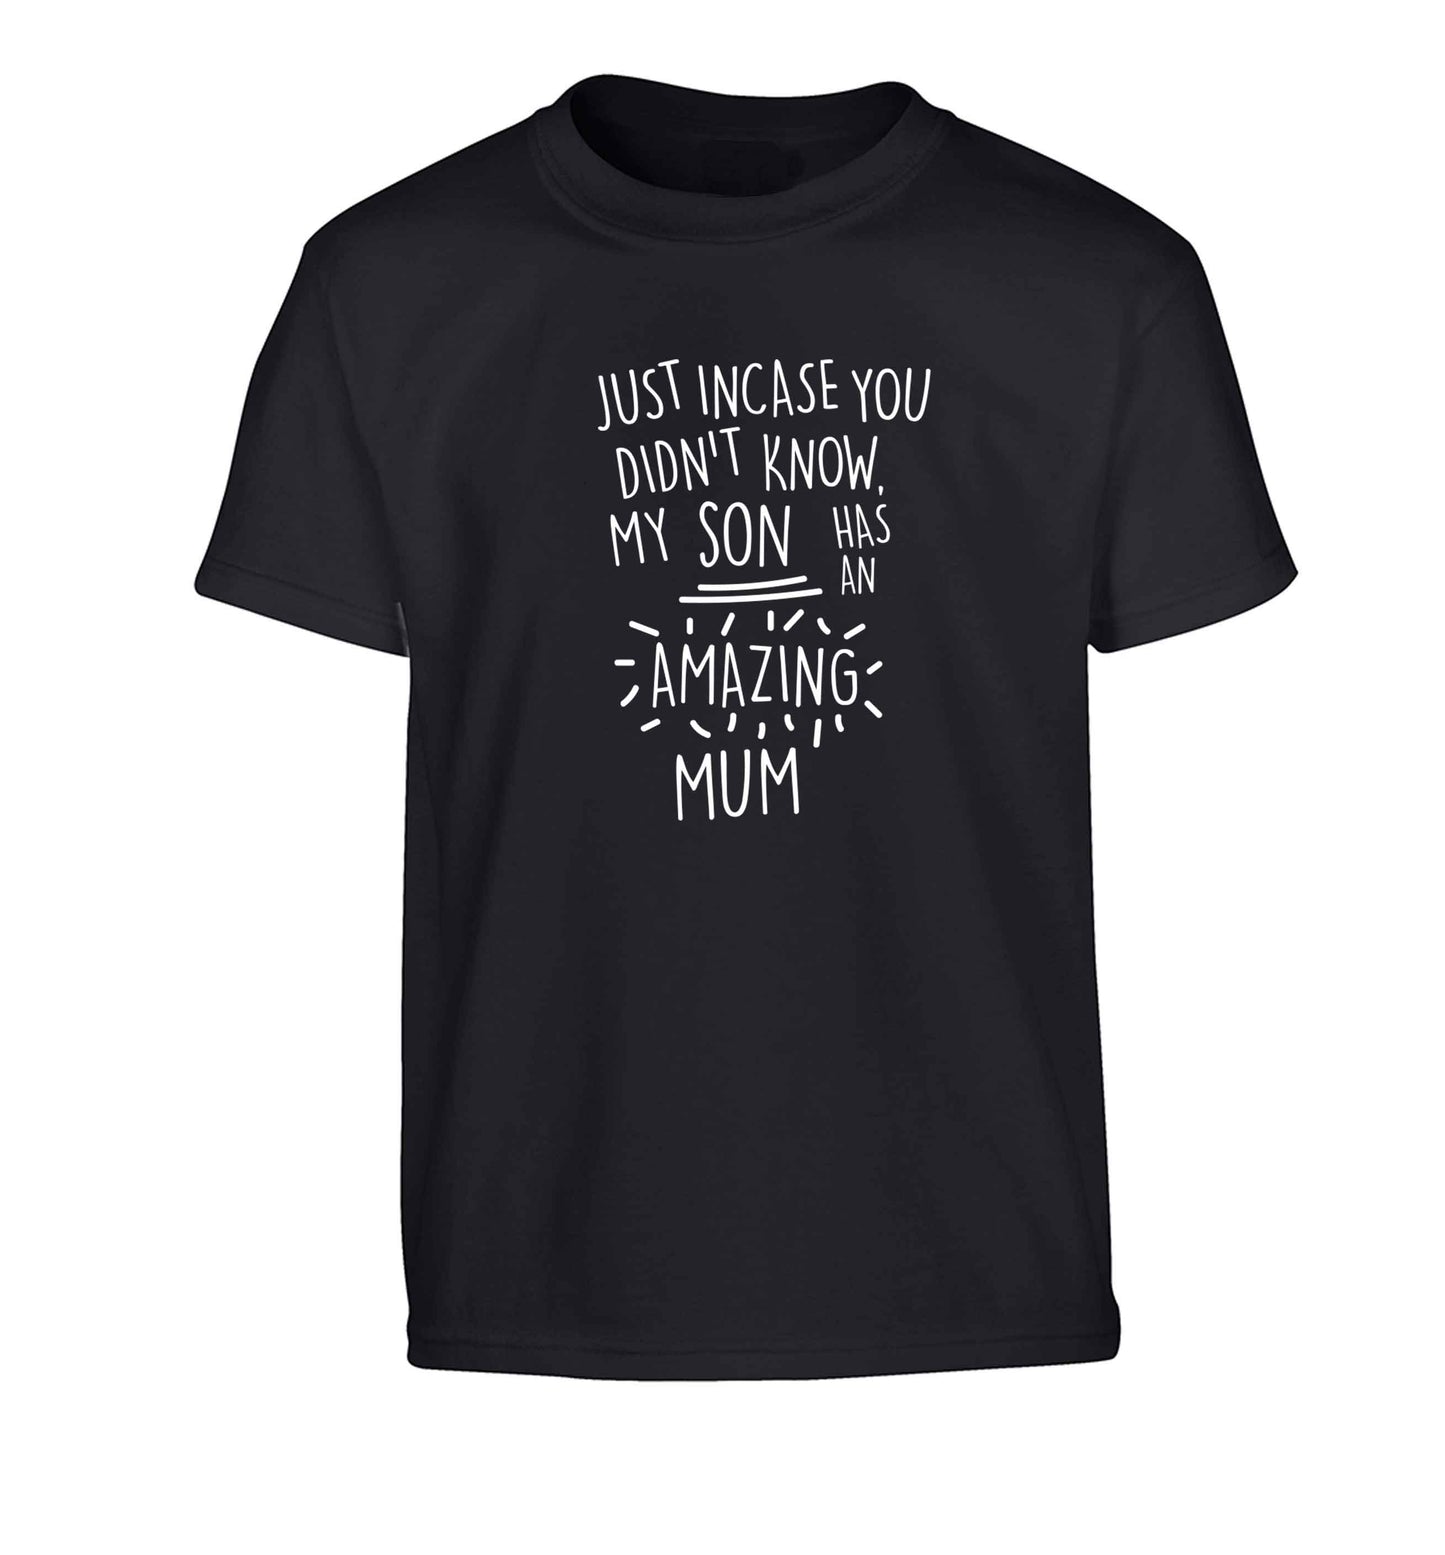 Just incase you didn't know my son has an amazing mum Children's black Tshirt 12-13 Years